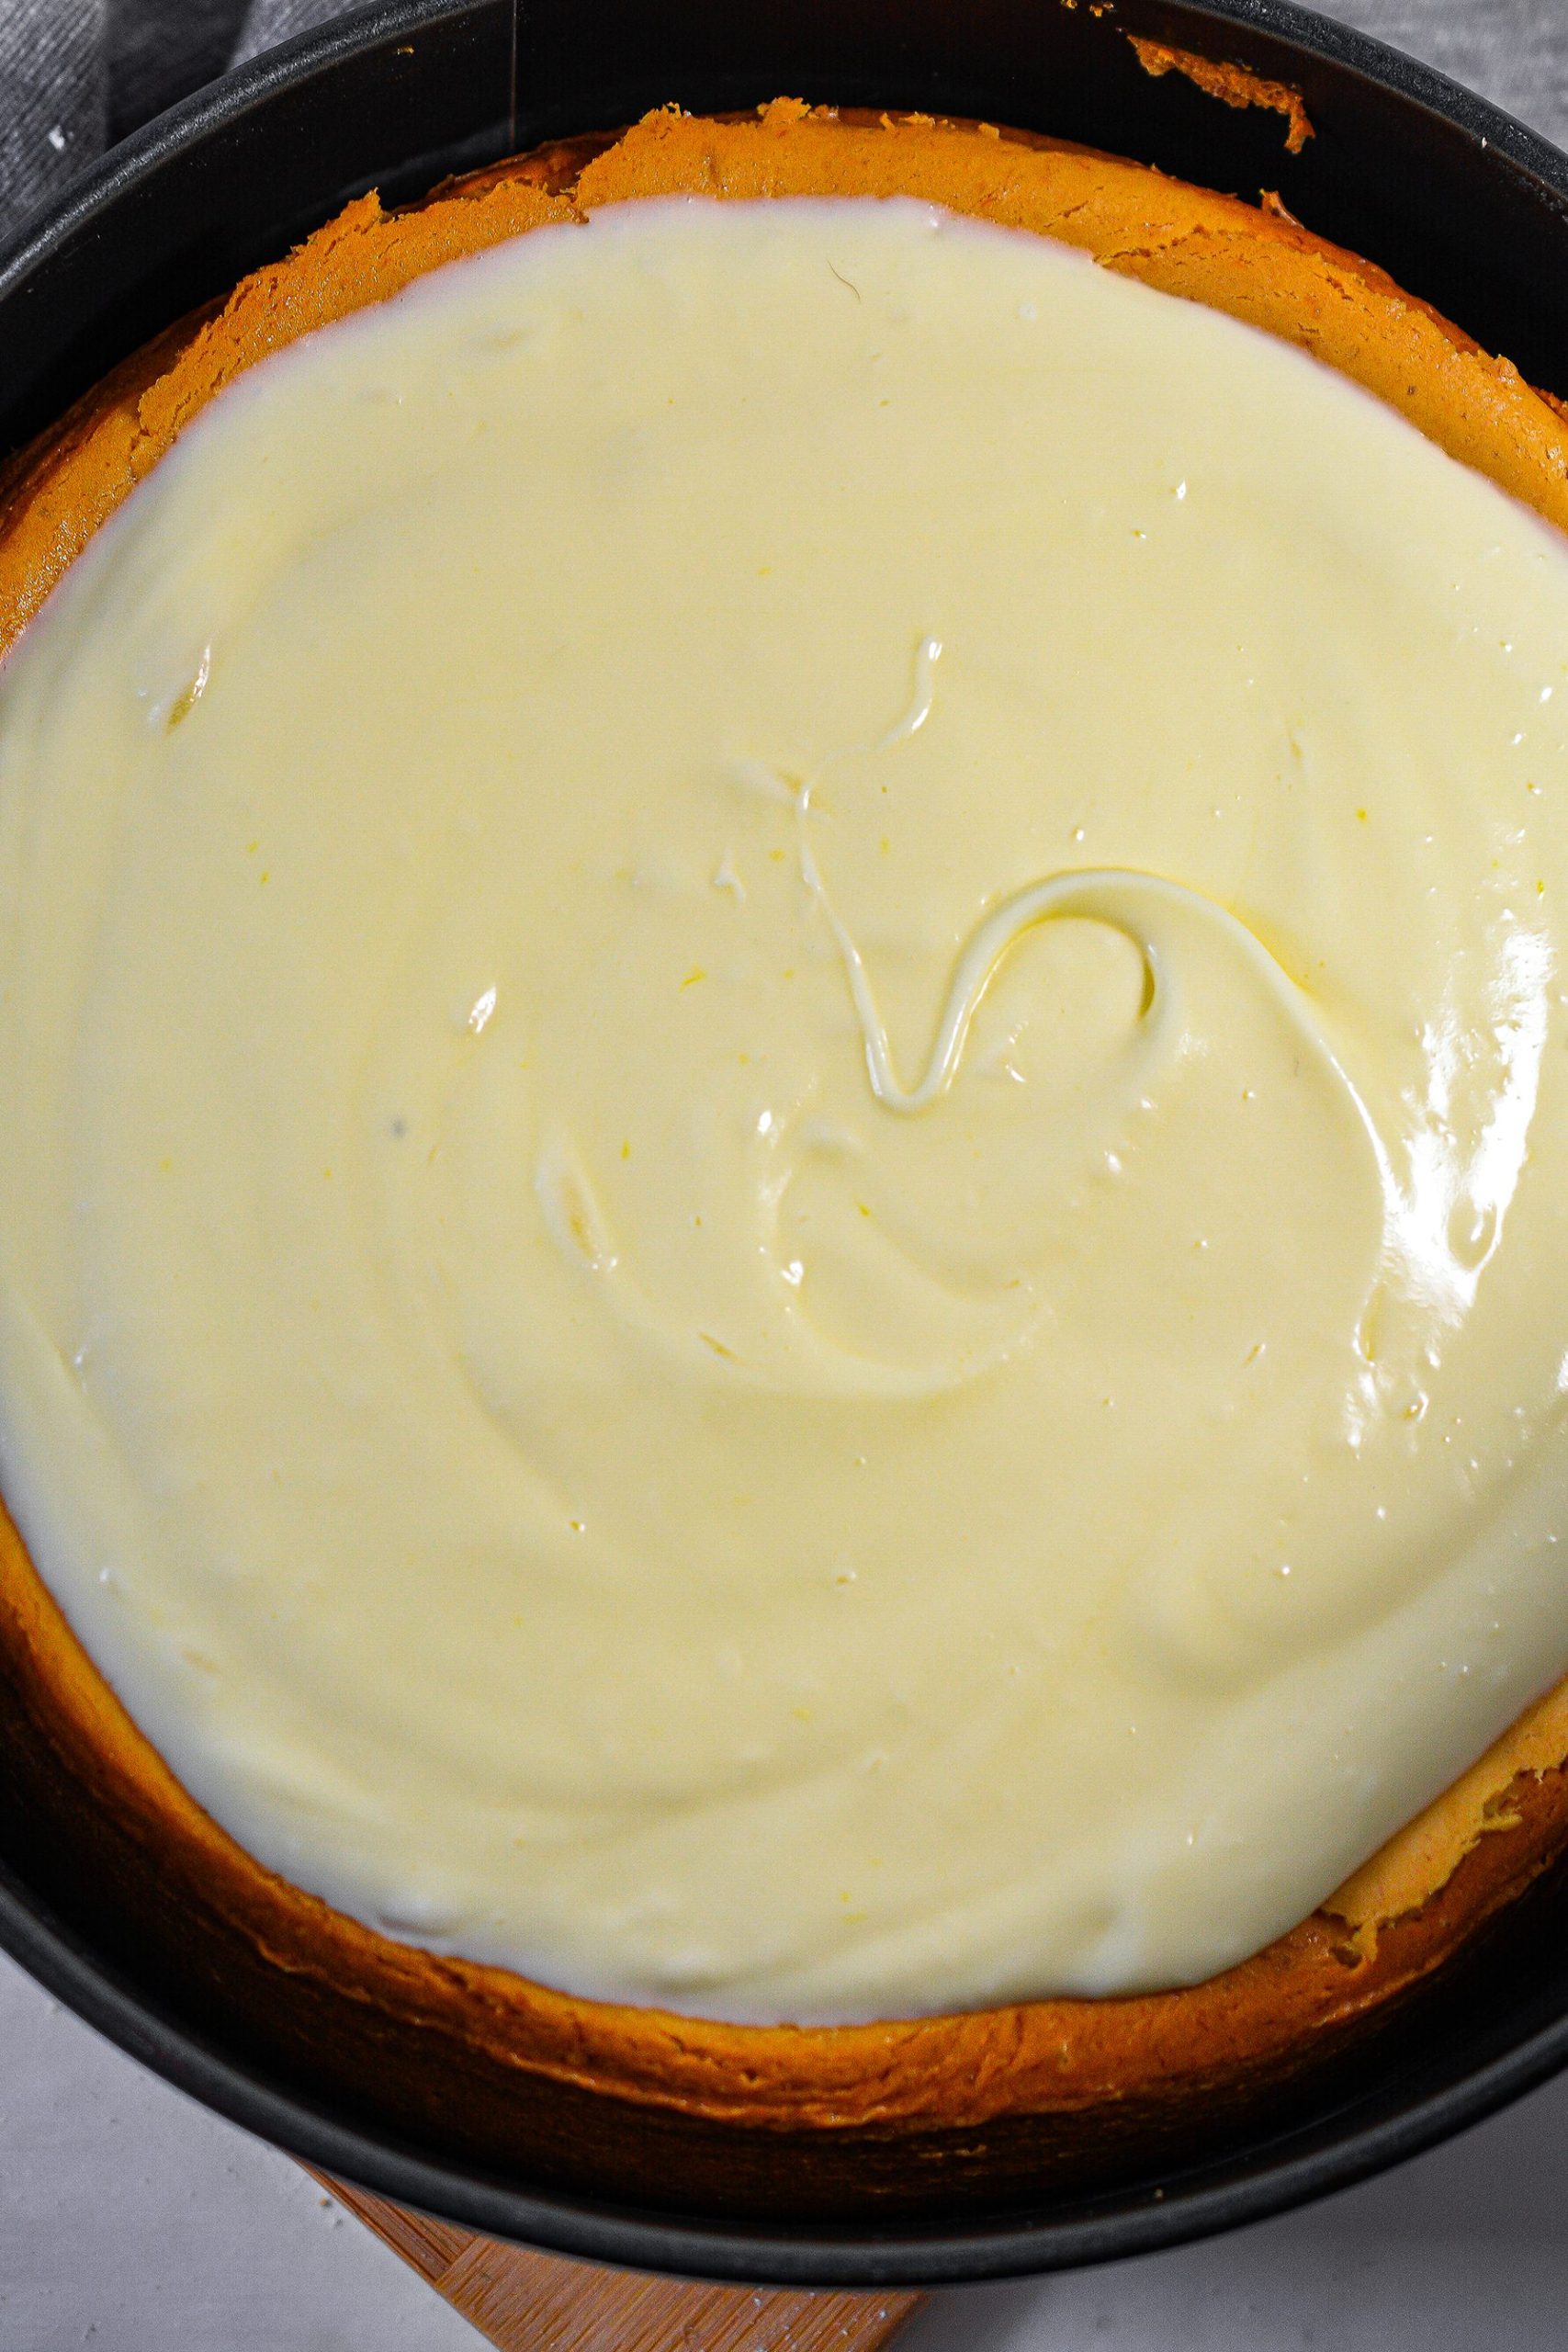 Spread the cream mixture over the top of the cheesecake.